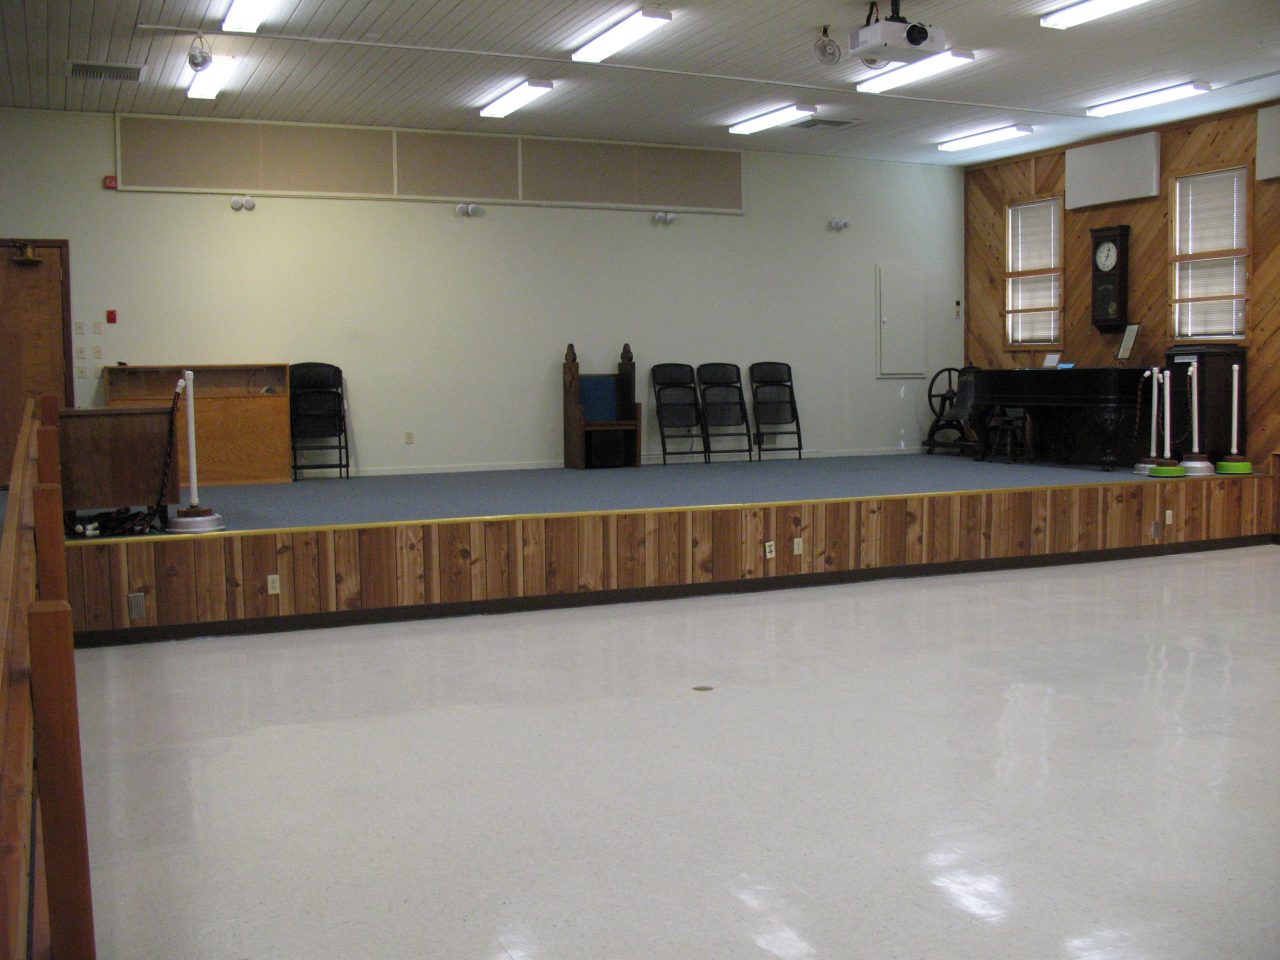 A stage in a community center